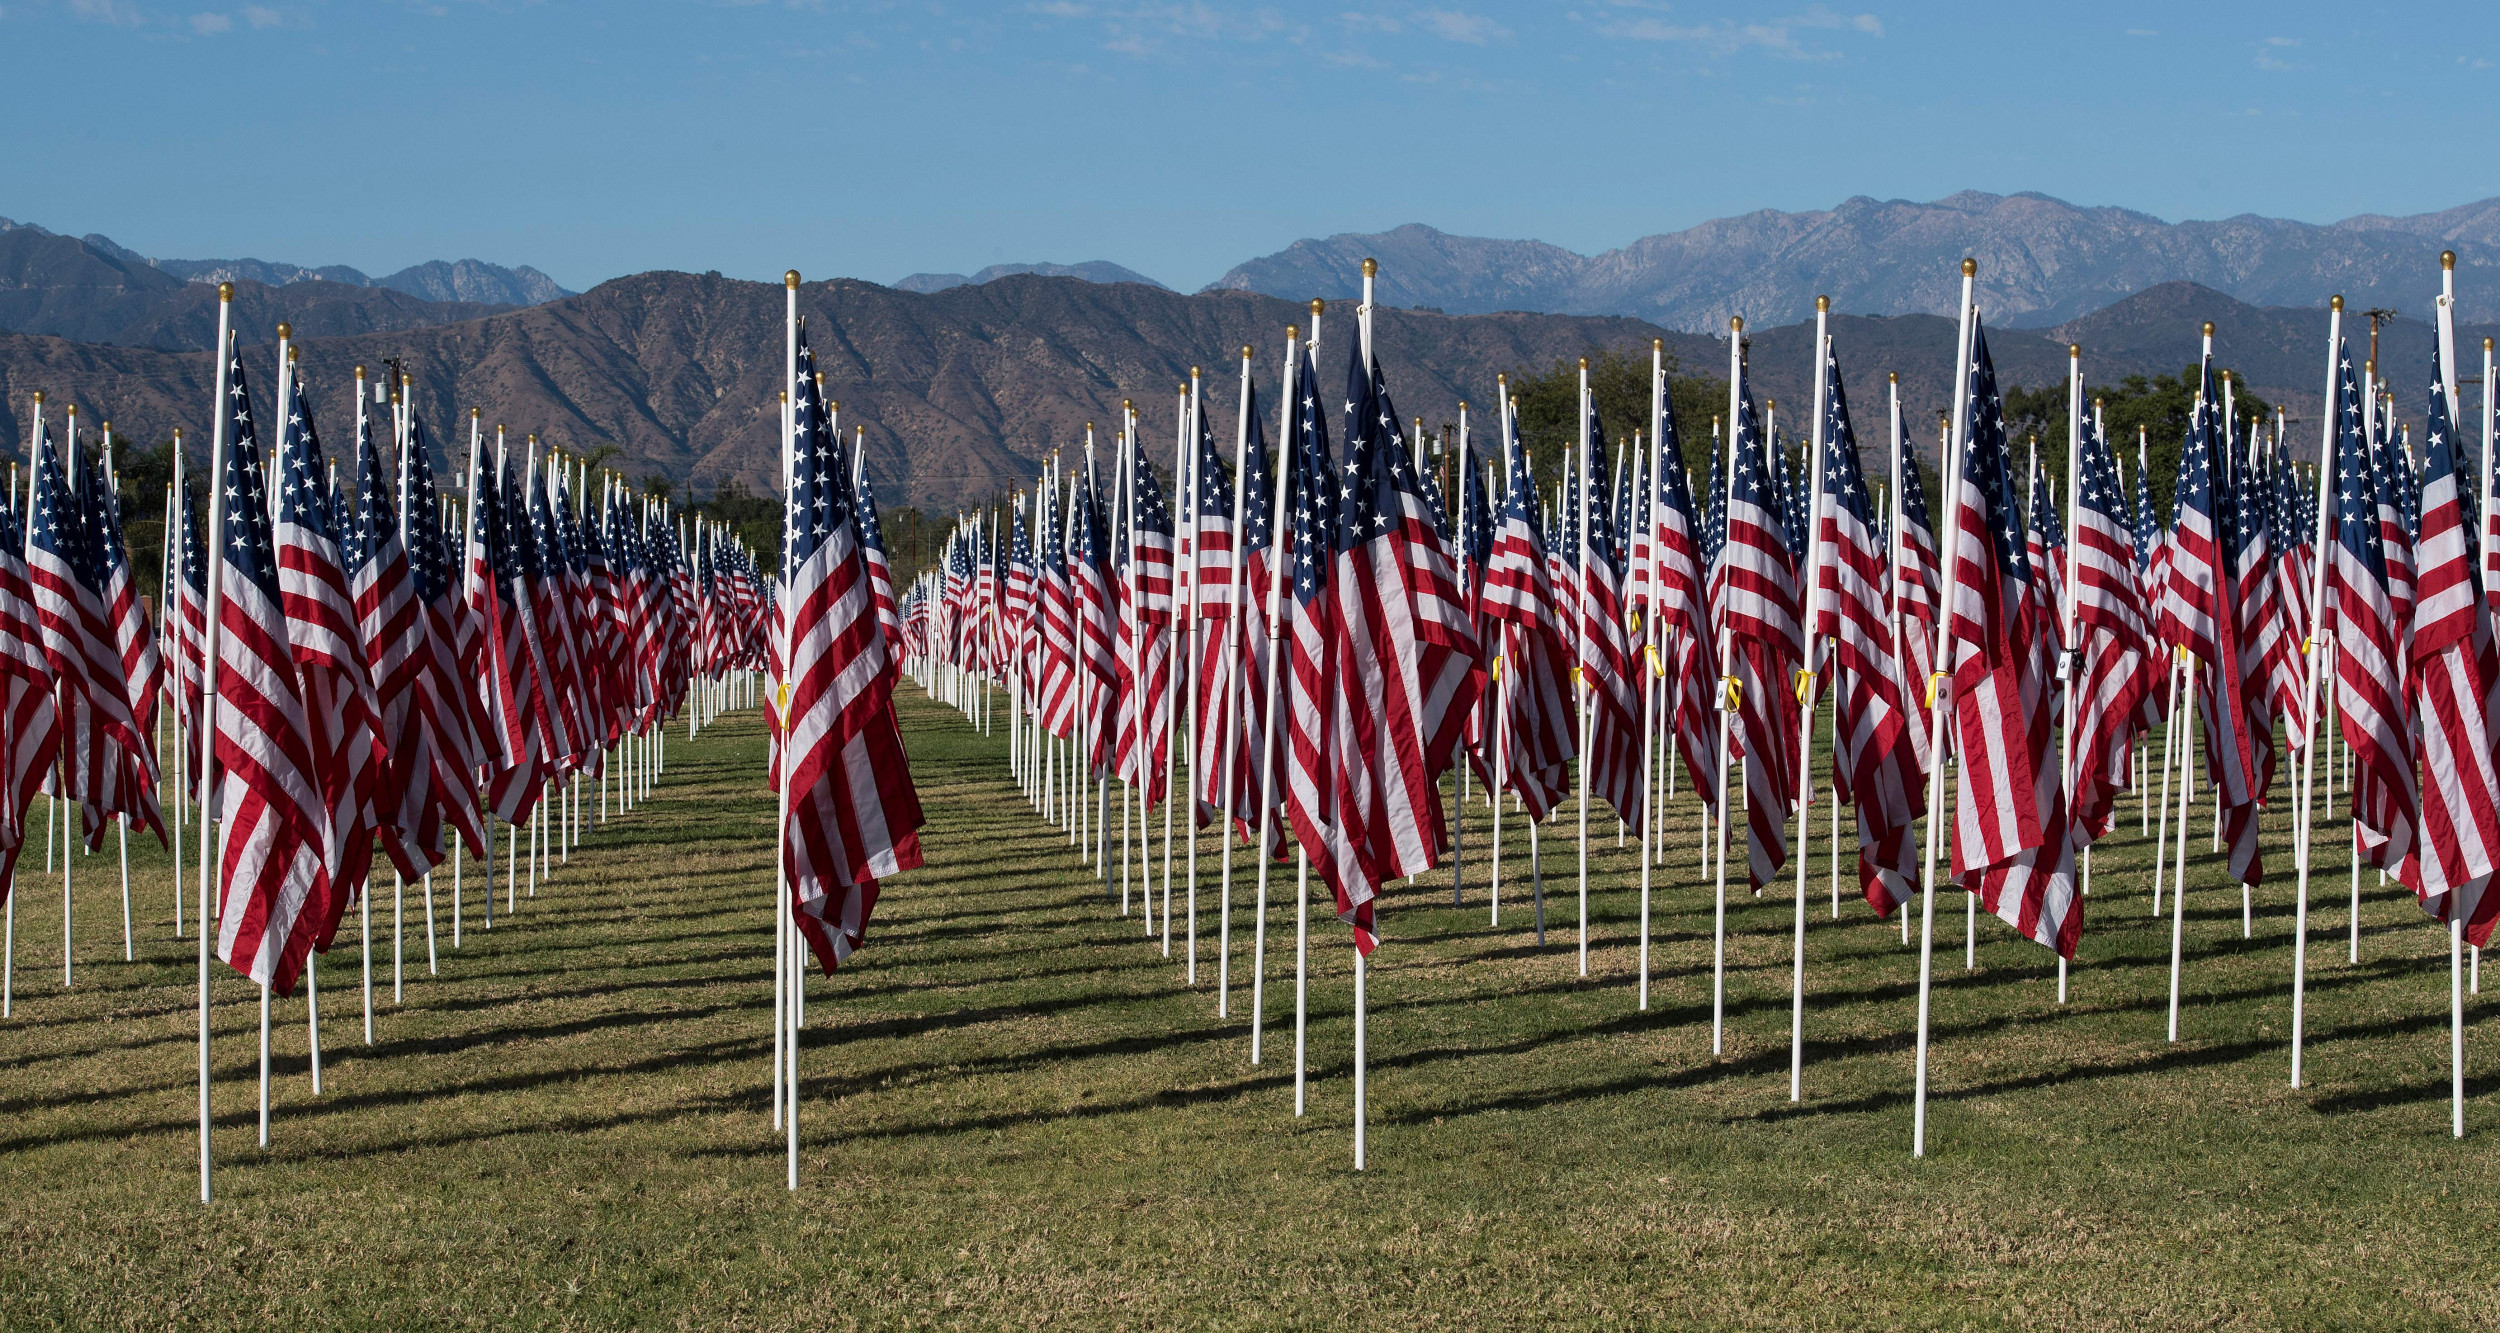 15 Memorial Day Quotes to Honor Those Who Bravely Served